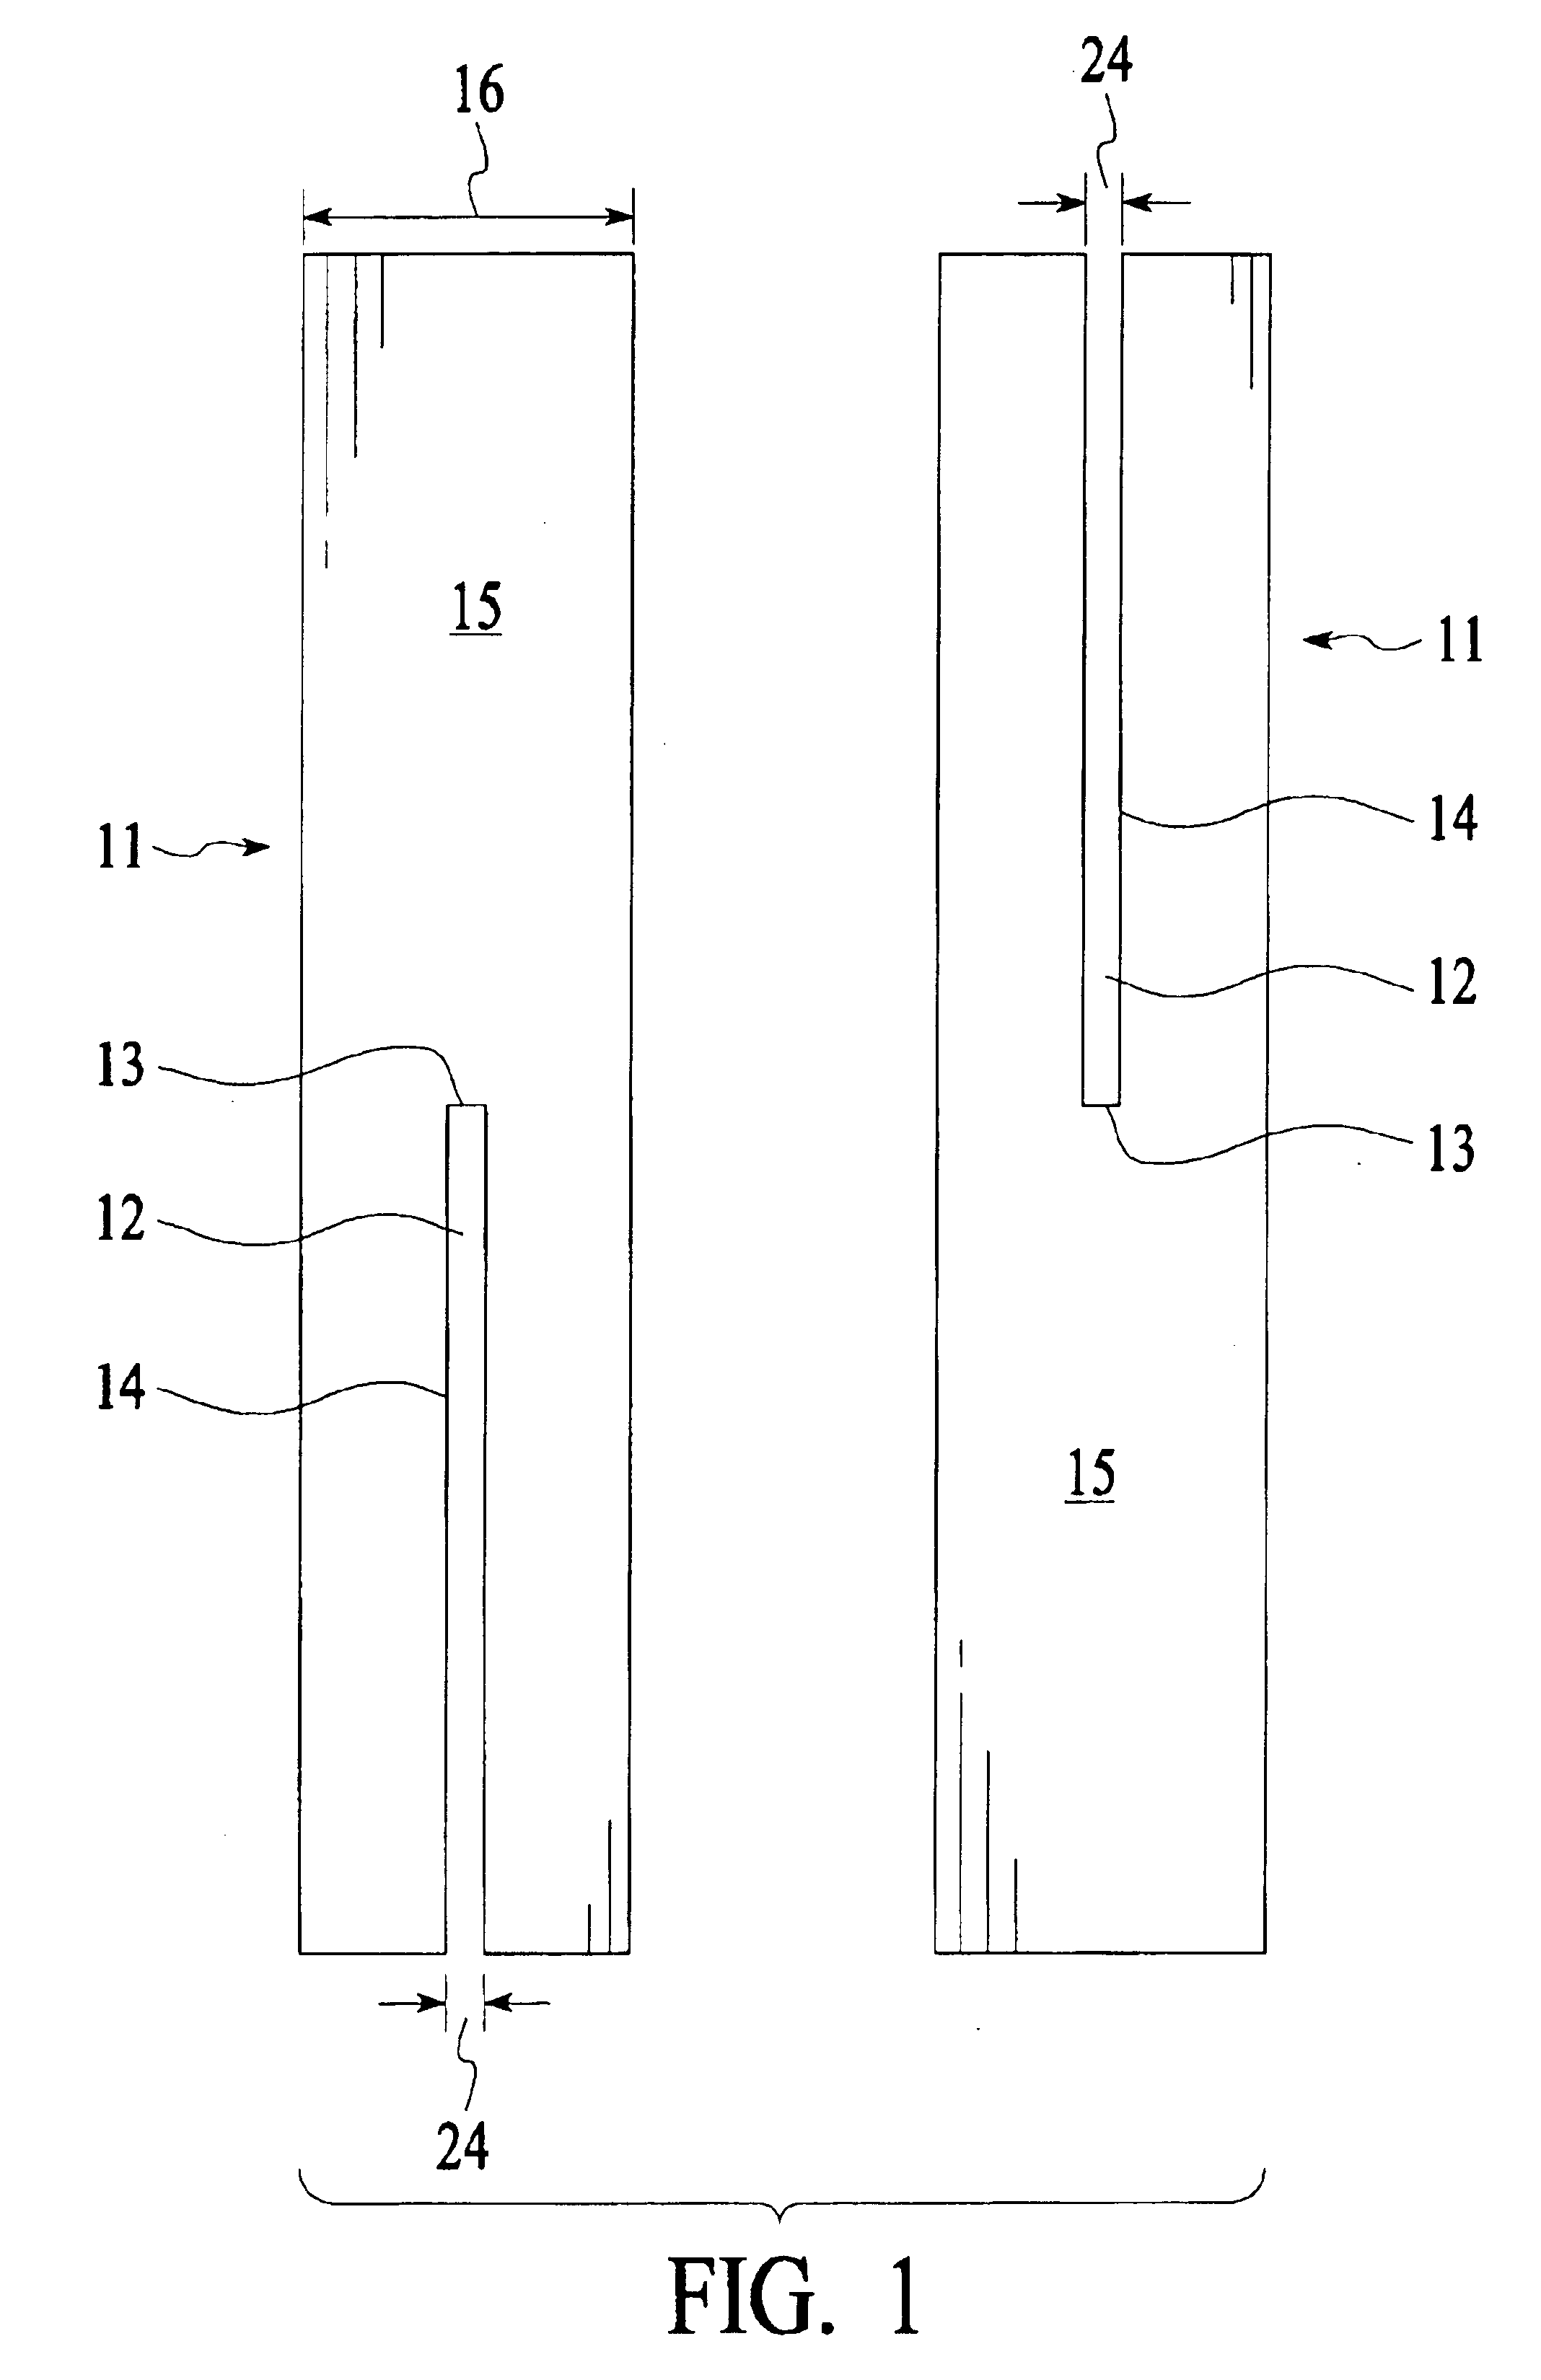 Structural system of interlocking sheets